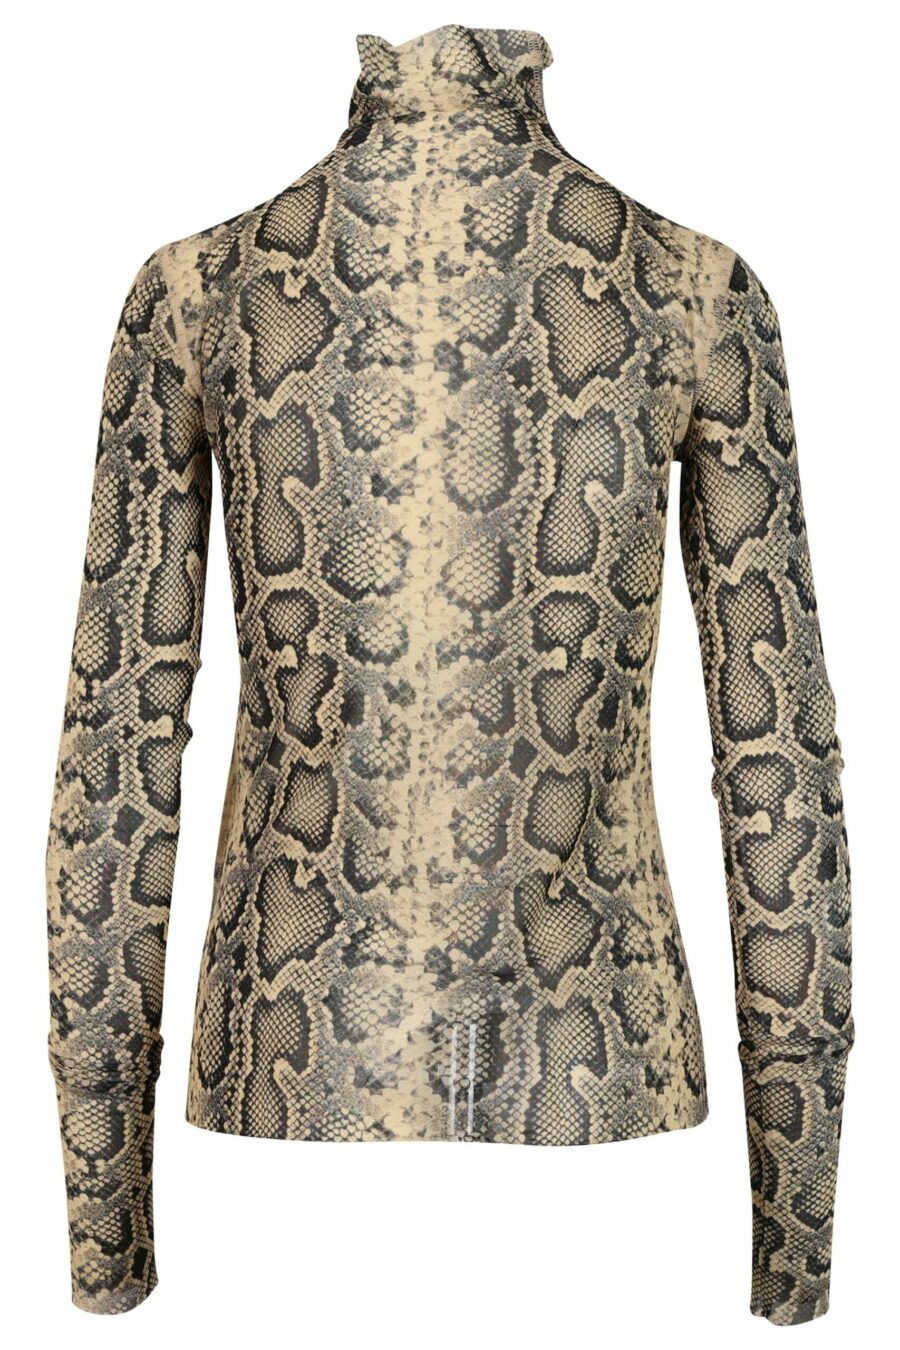 Beige T-shirt with snake print, long sleeves and semi-transparent - 8054943306899 2 scaled